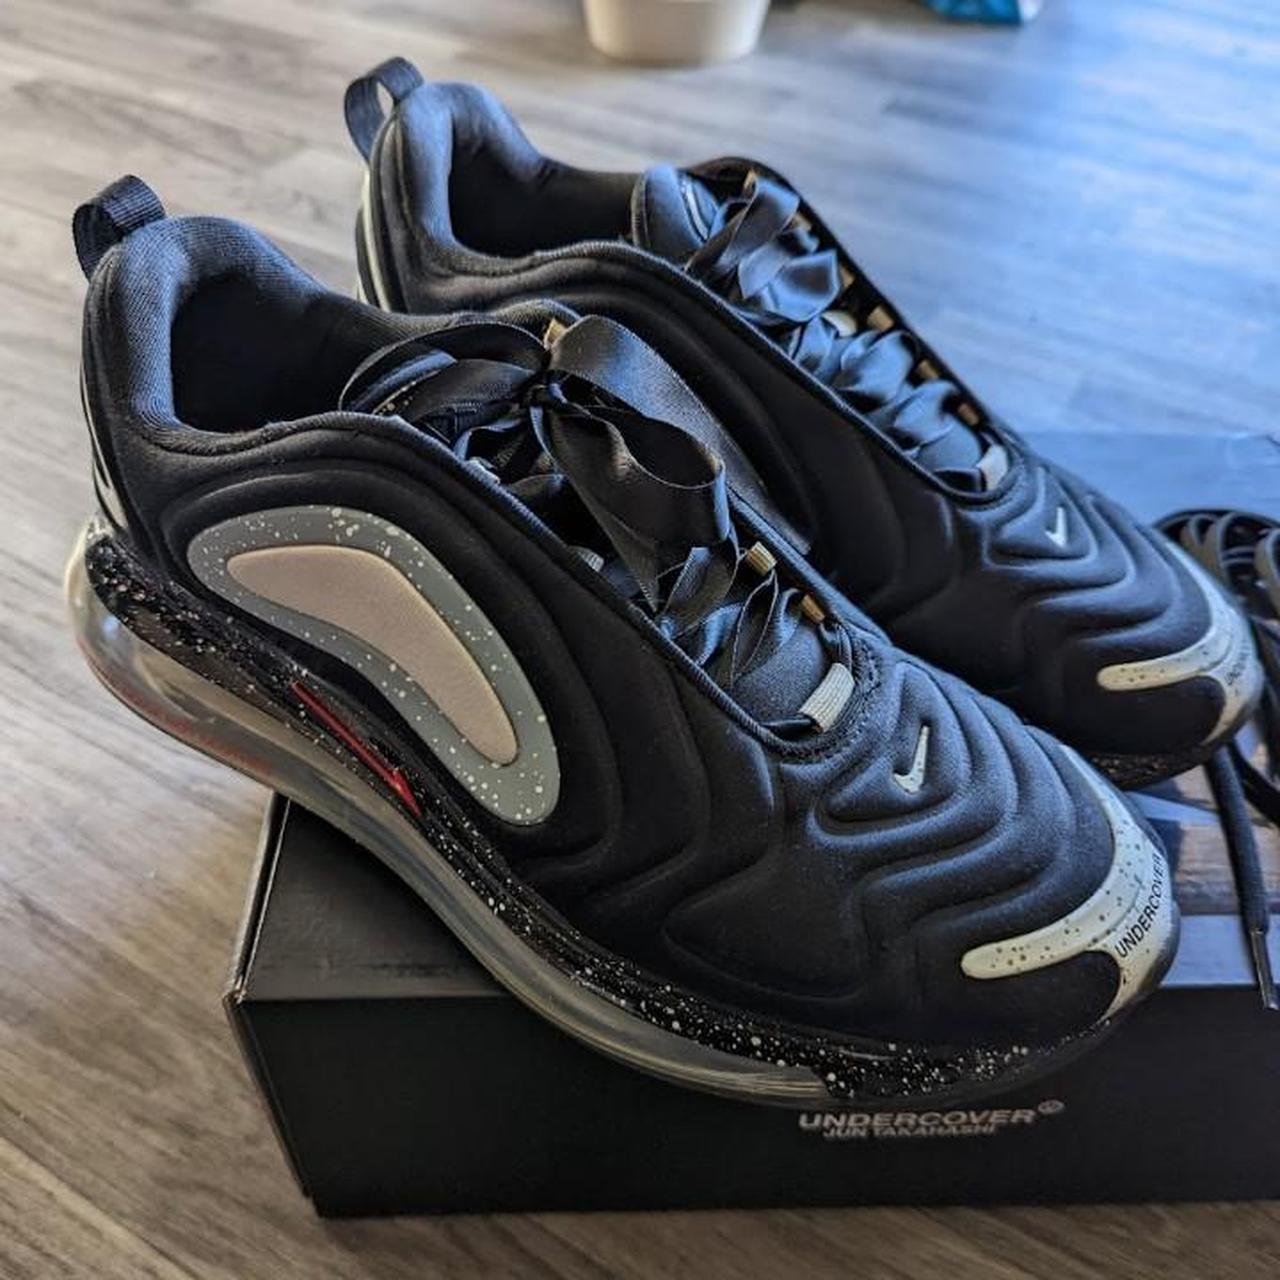 Nike Air Max 720 Undercover Shoes